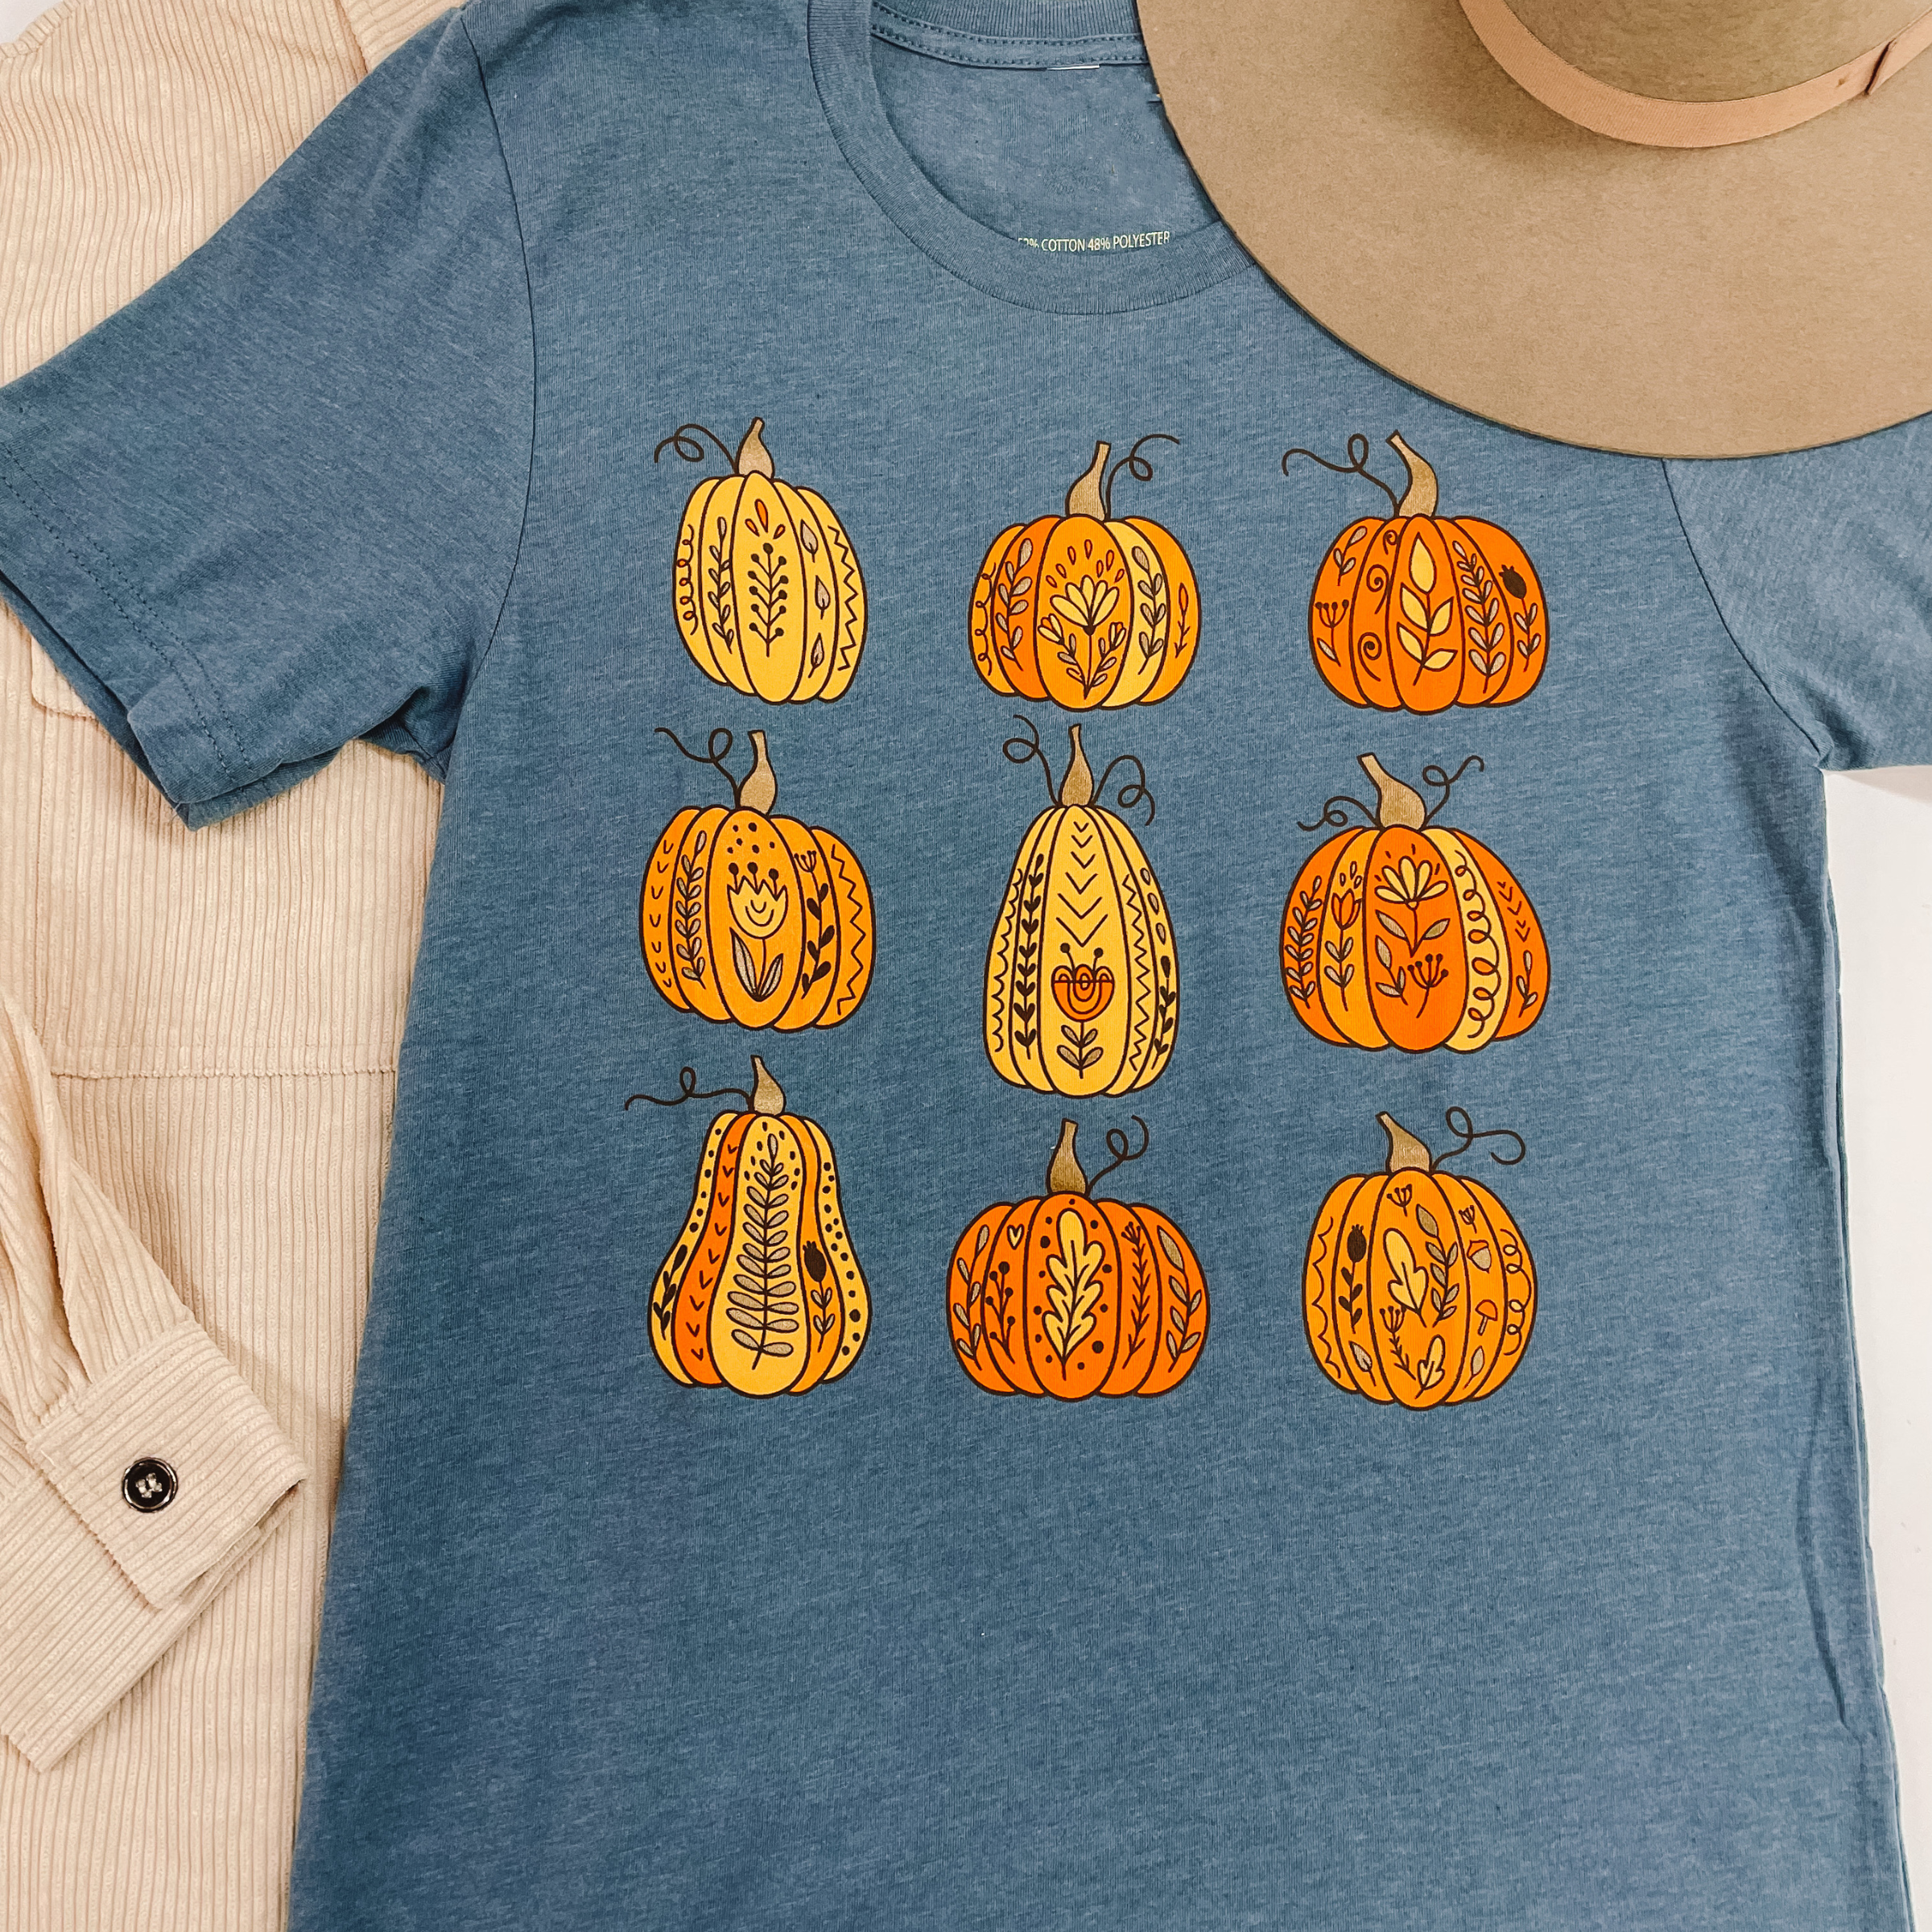 A short sleeve graphic tee with three rows of three pumpkins that have a flower on the front. Pictured on a white background with a beige shacket and a mushroom felt hat.